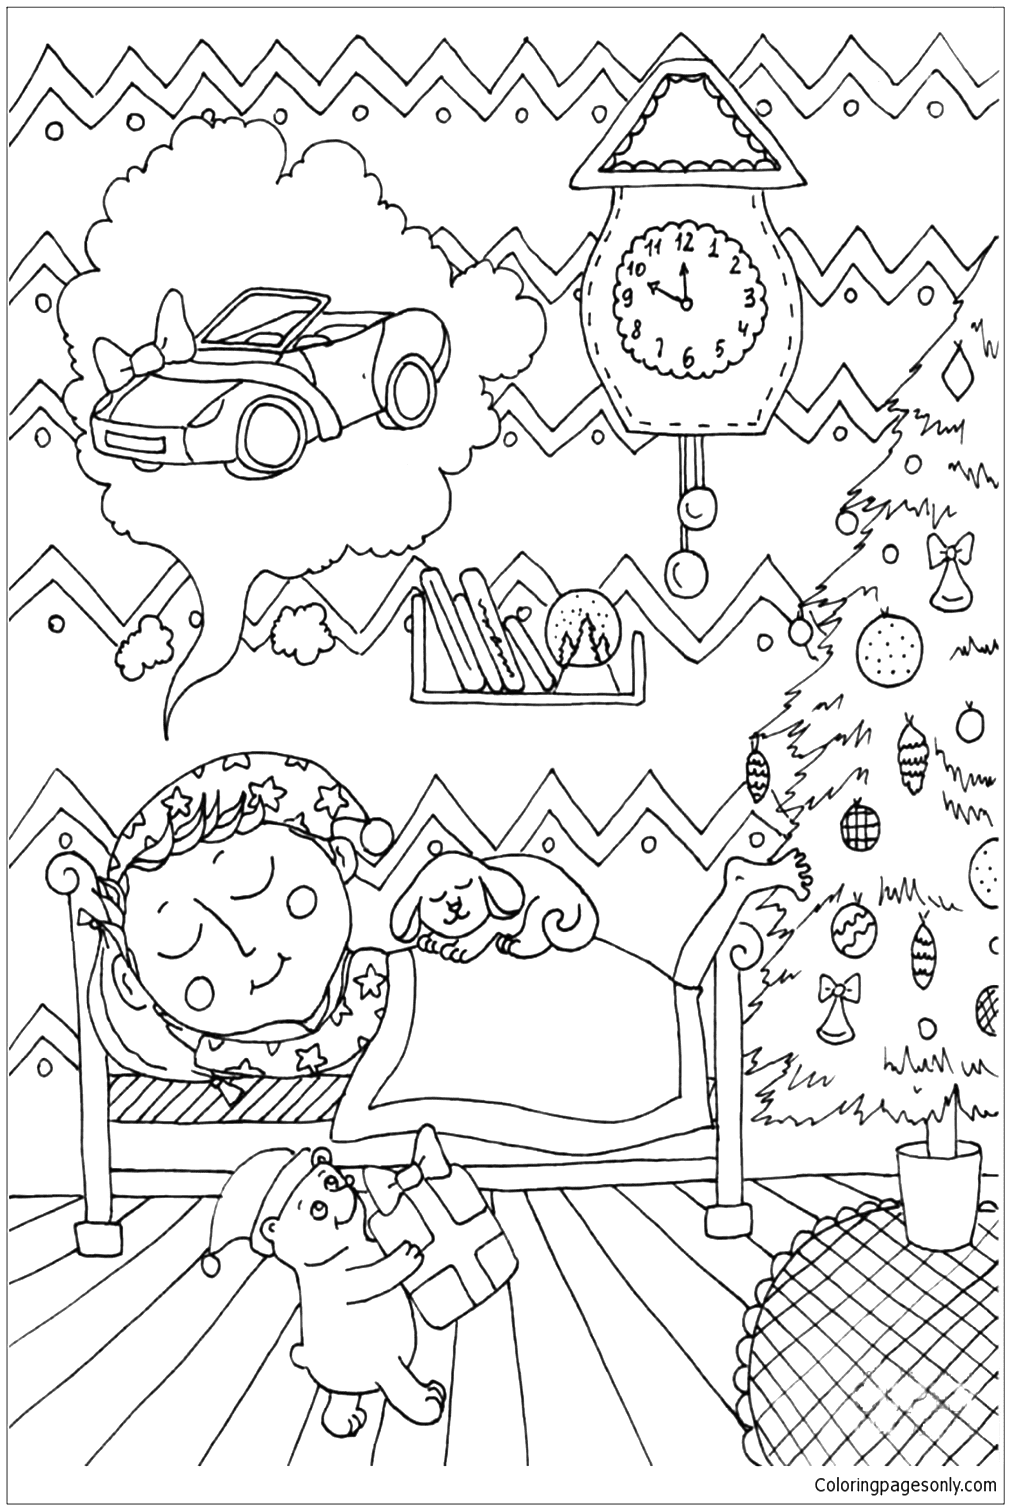 Peter Boy in December Coloring Page